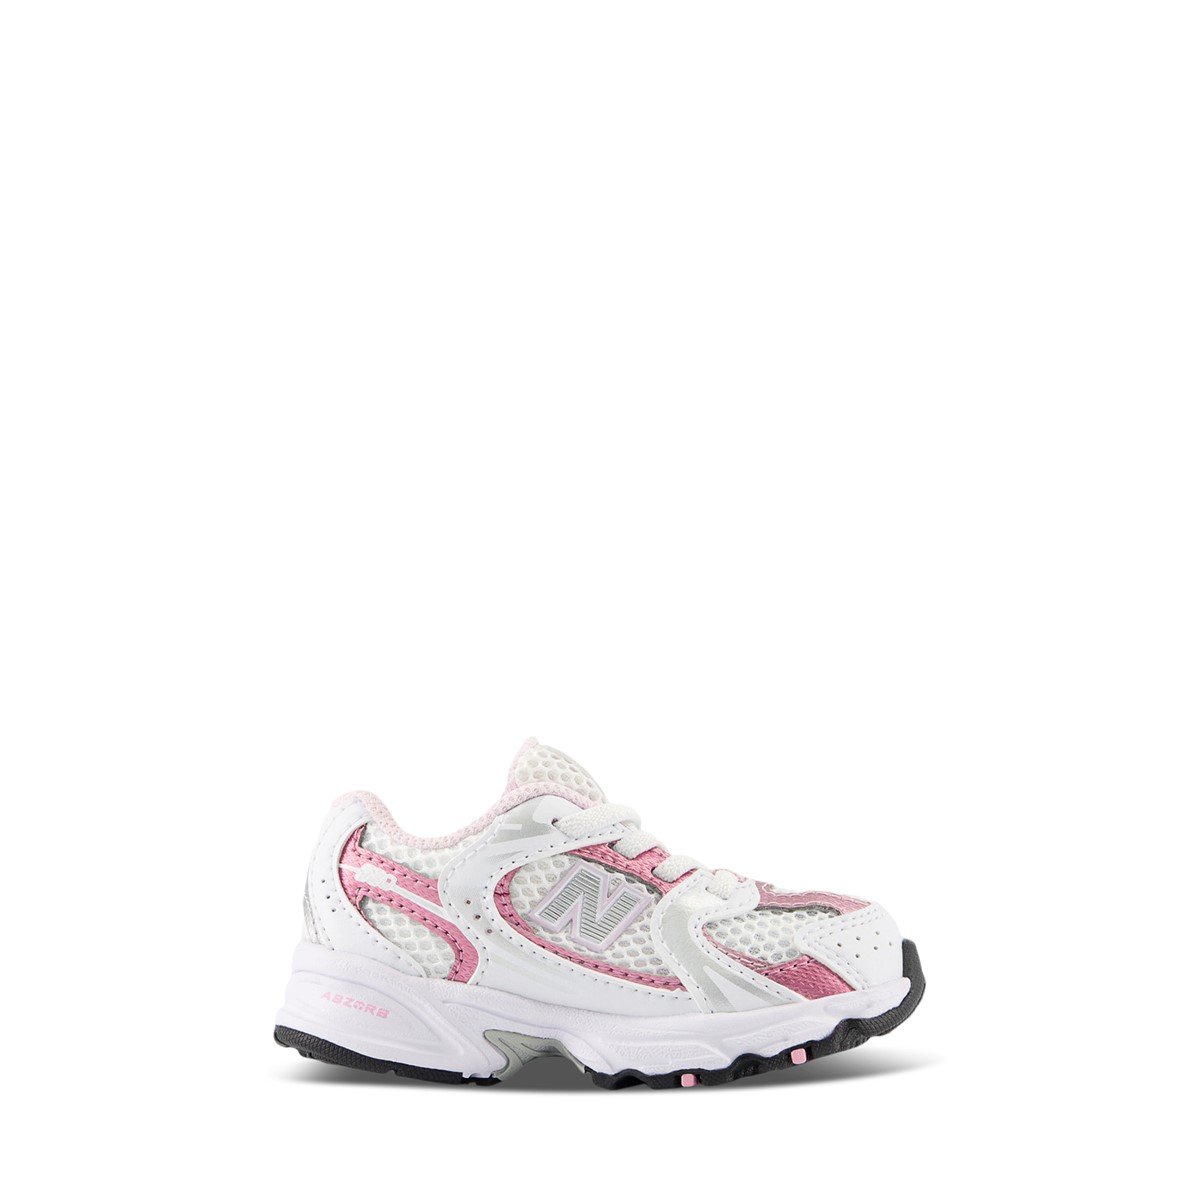 Toddler's 530 Sneakers in White/Pink